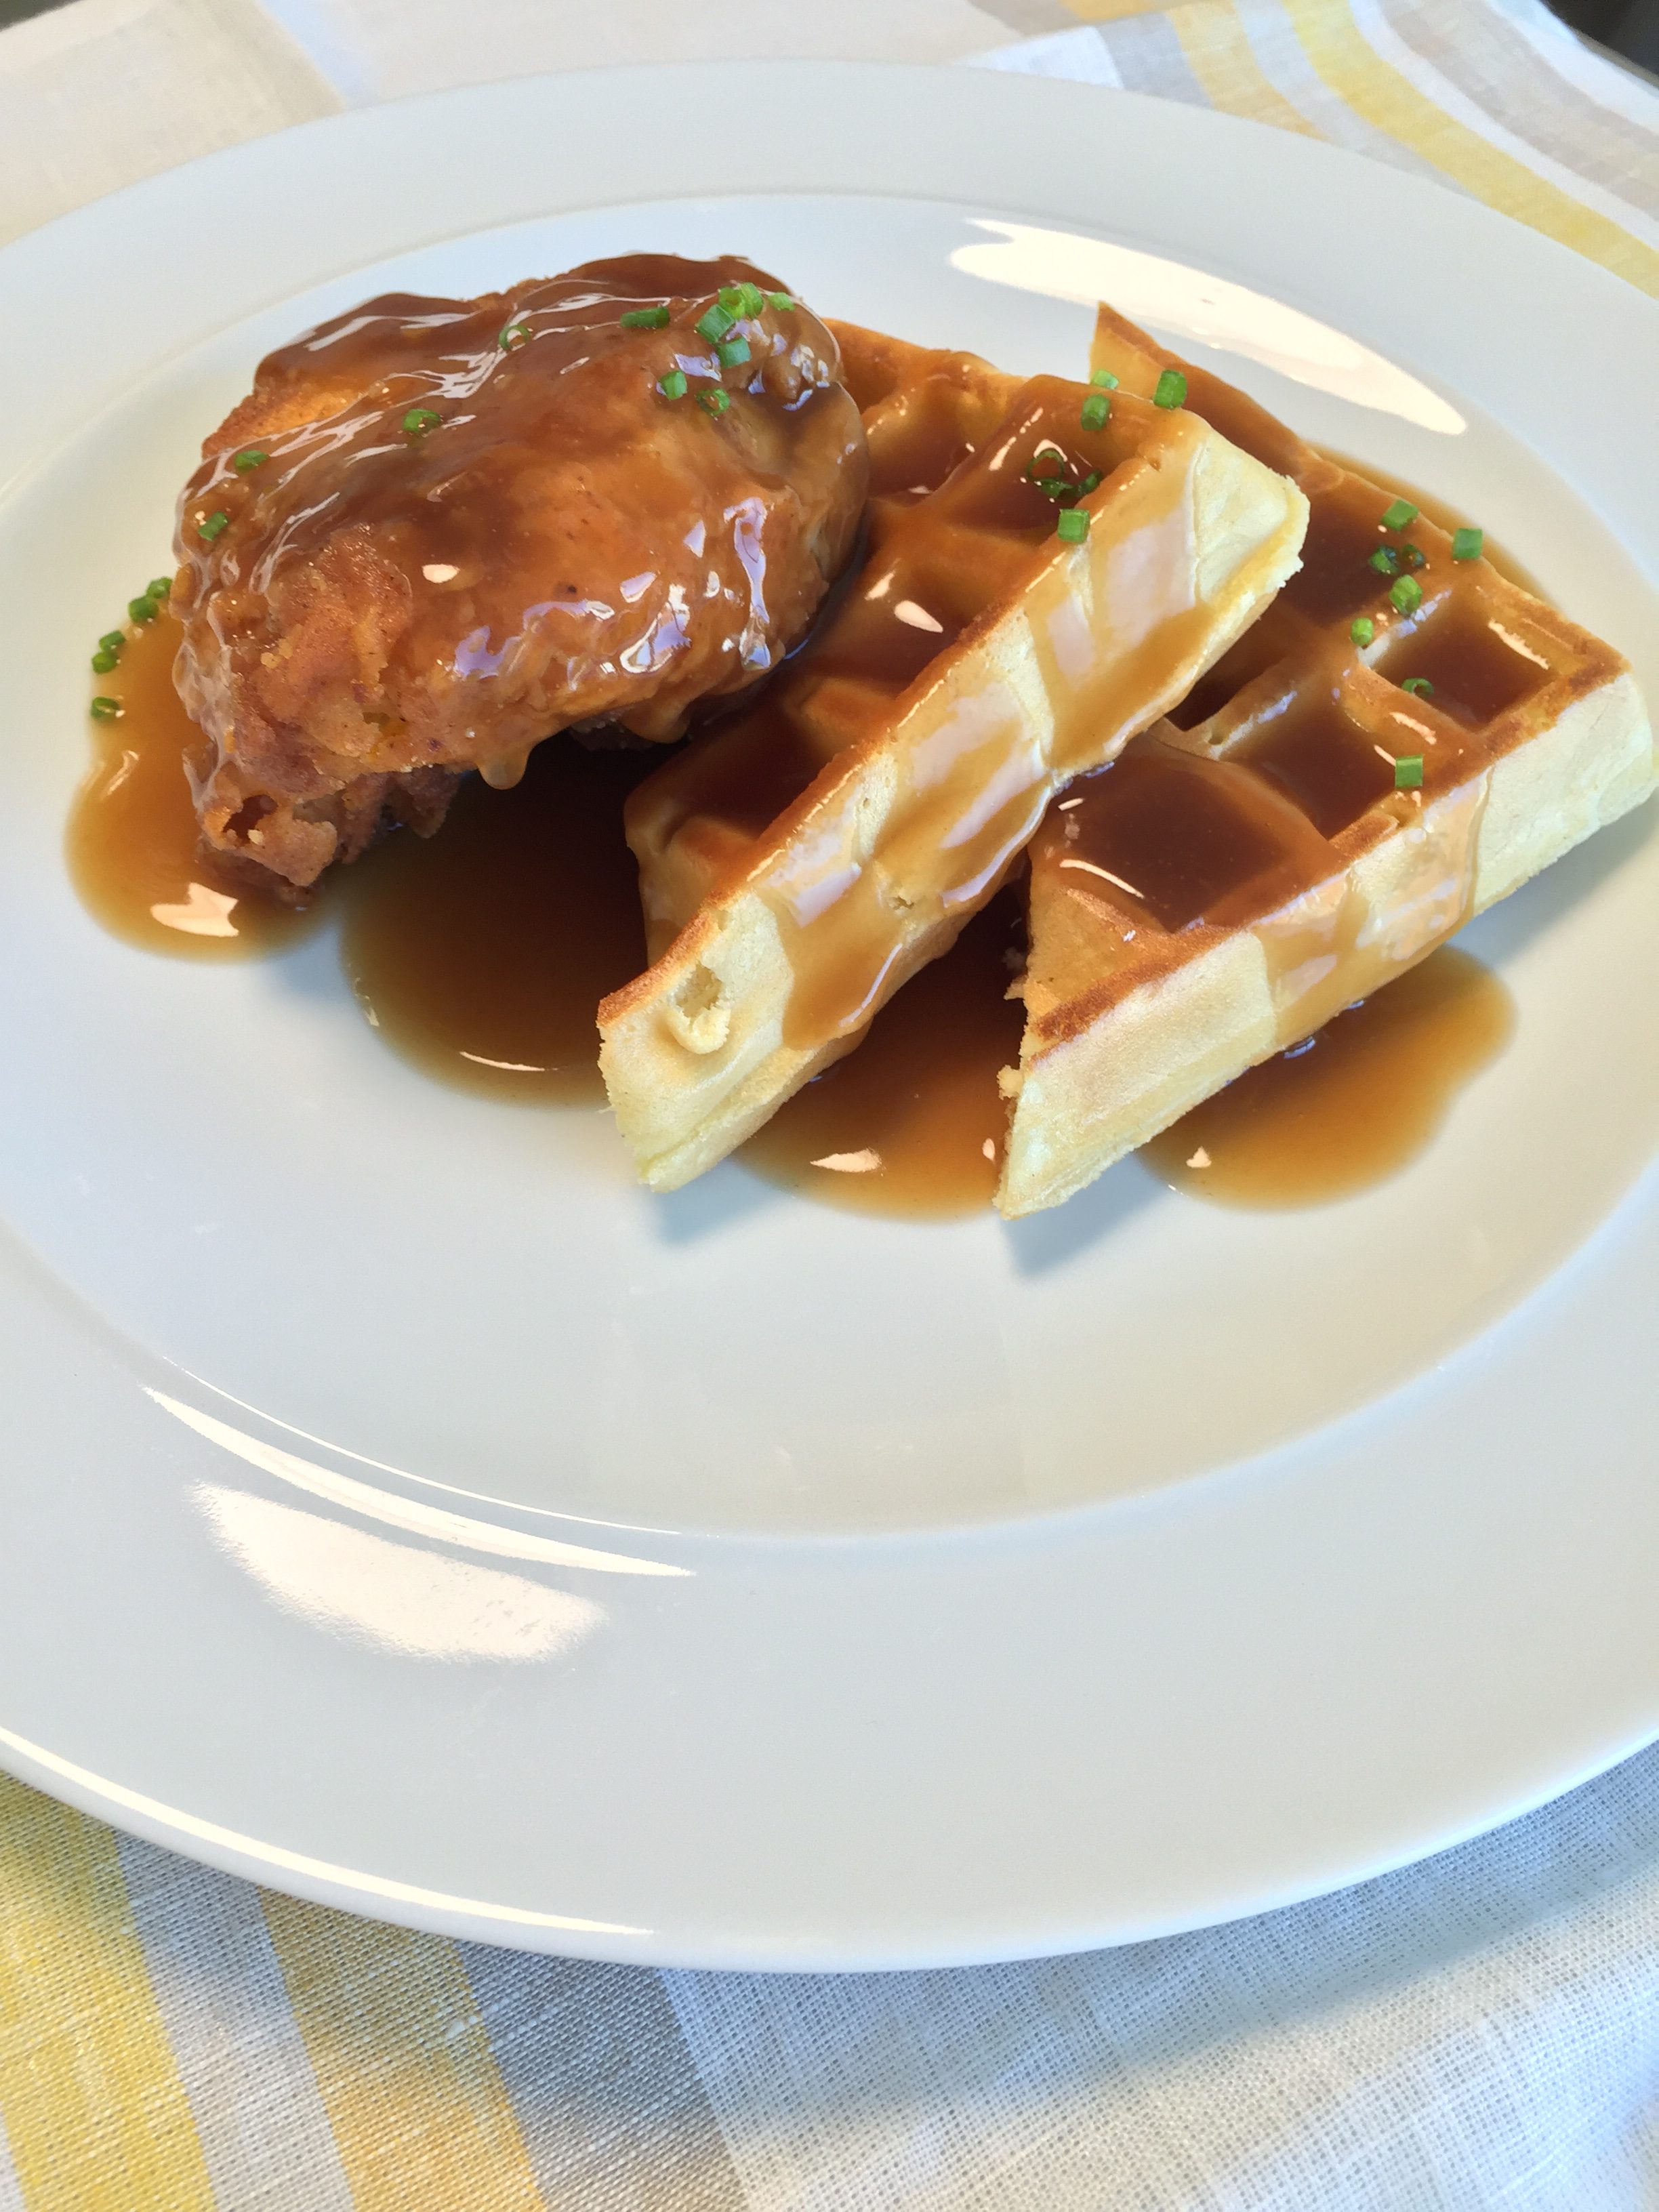 Waffles and southern fried chicken